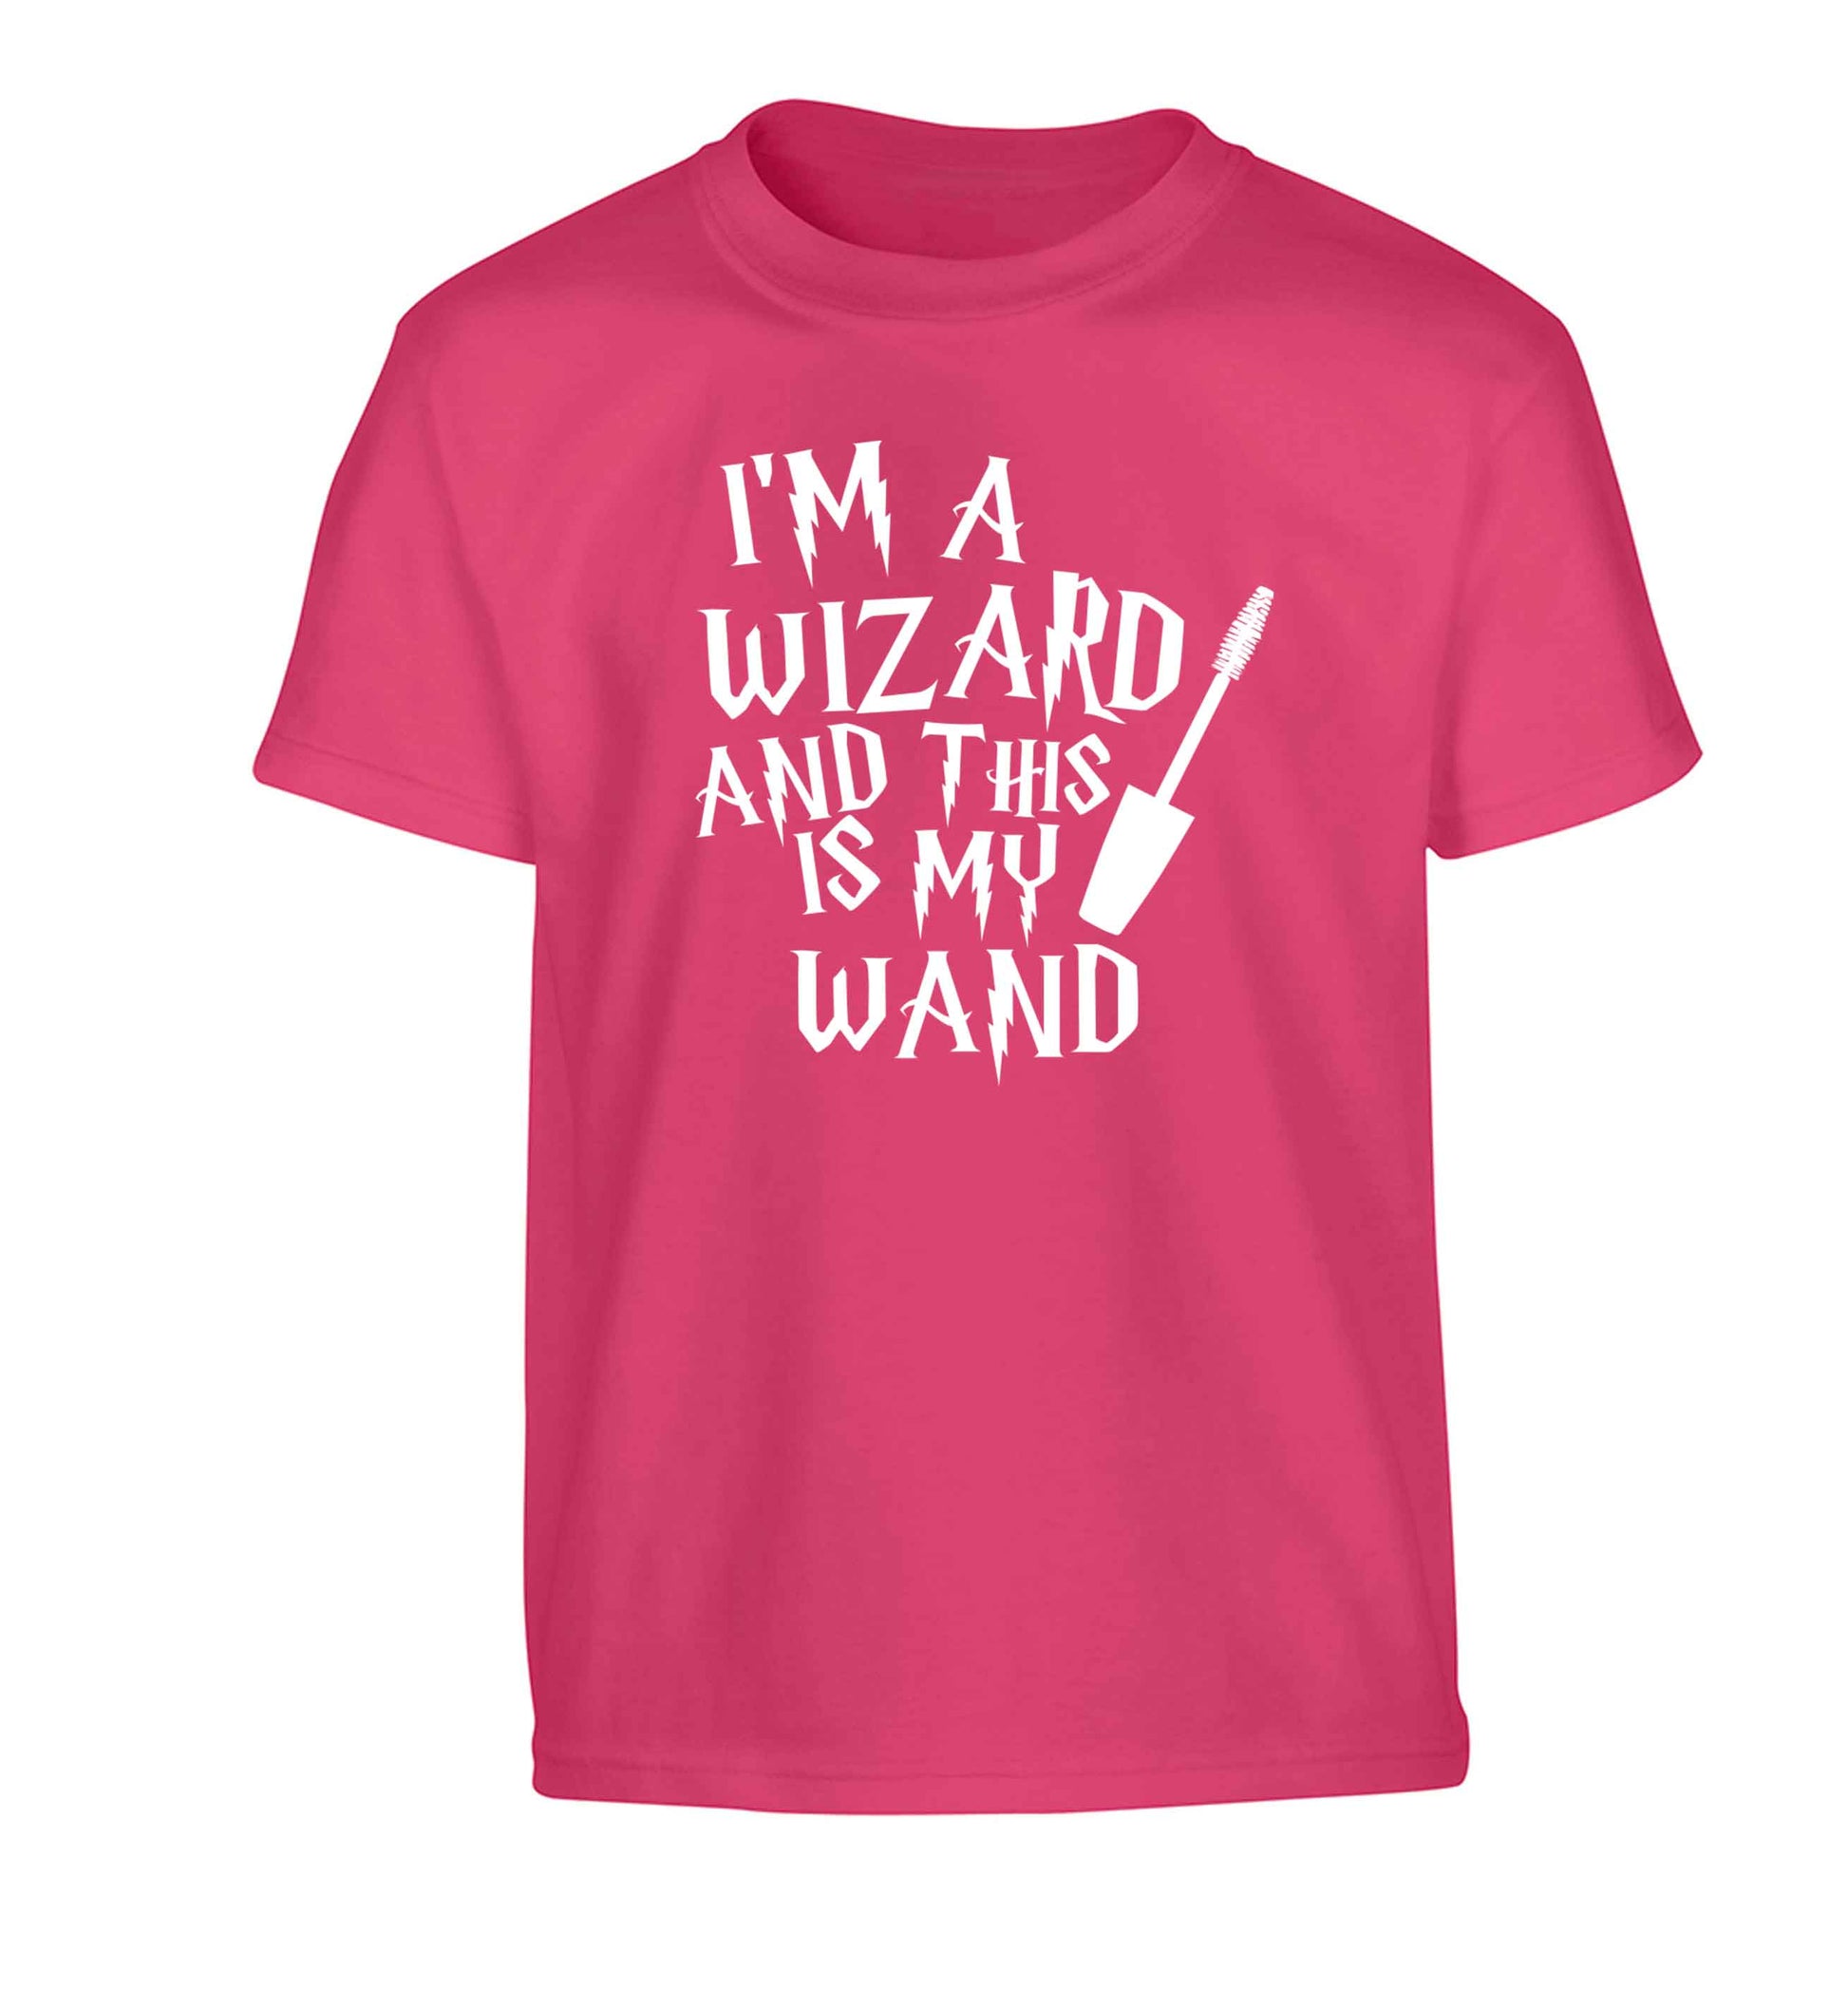 I'm a wizard and this is my wand Children's pink Tshirt 12-13 Years